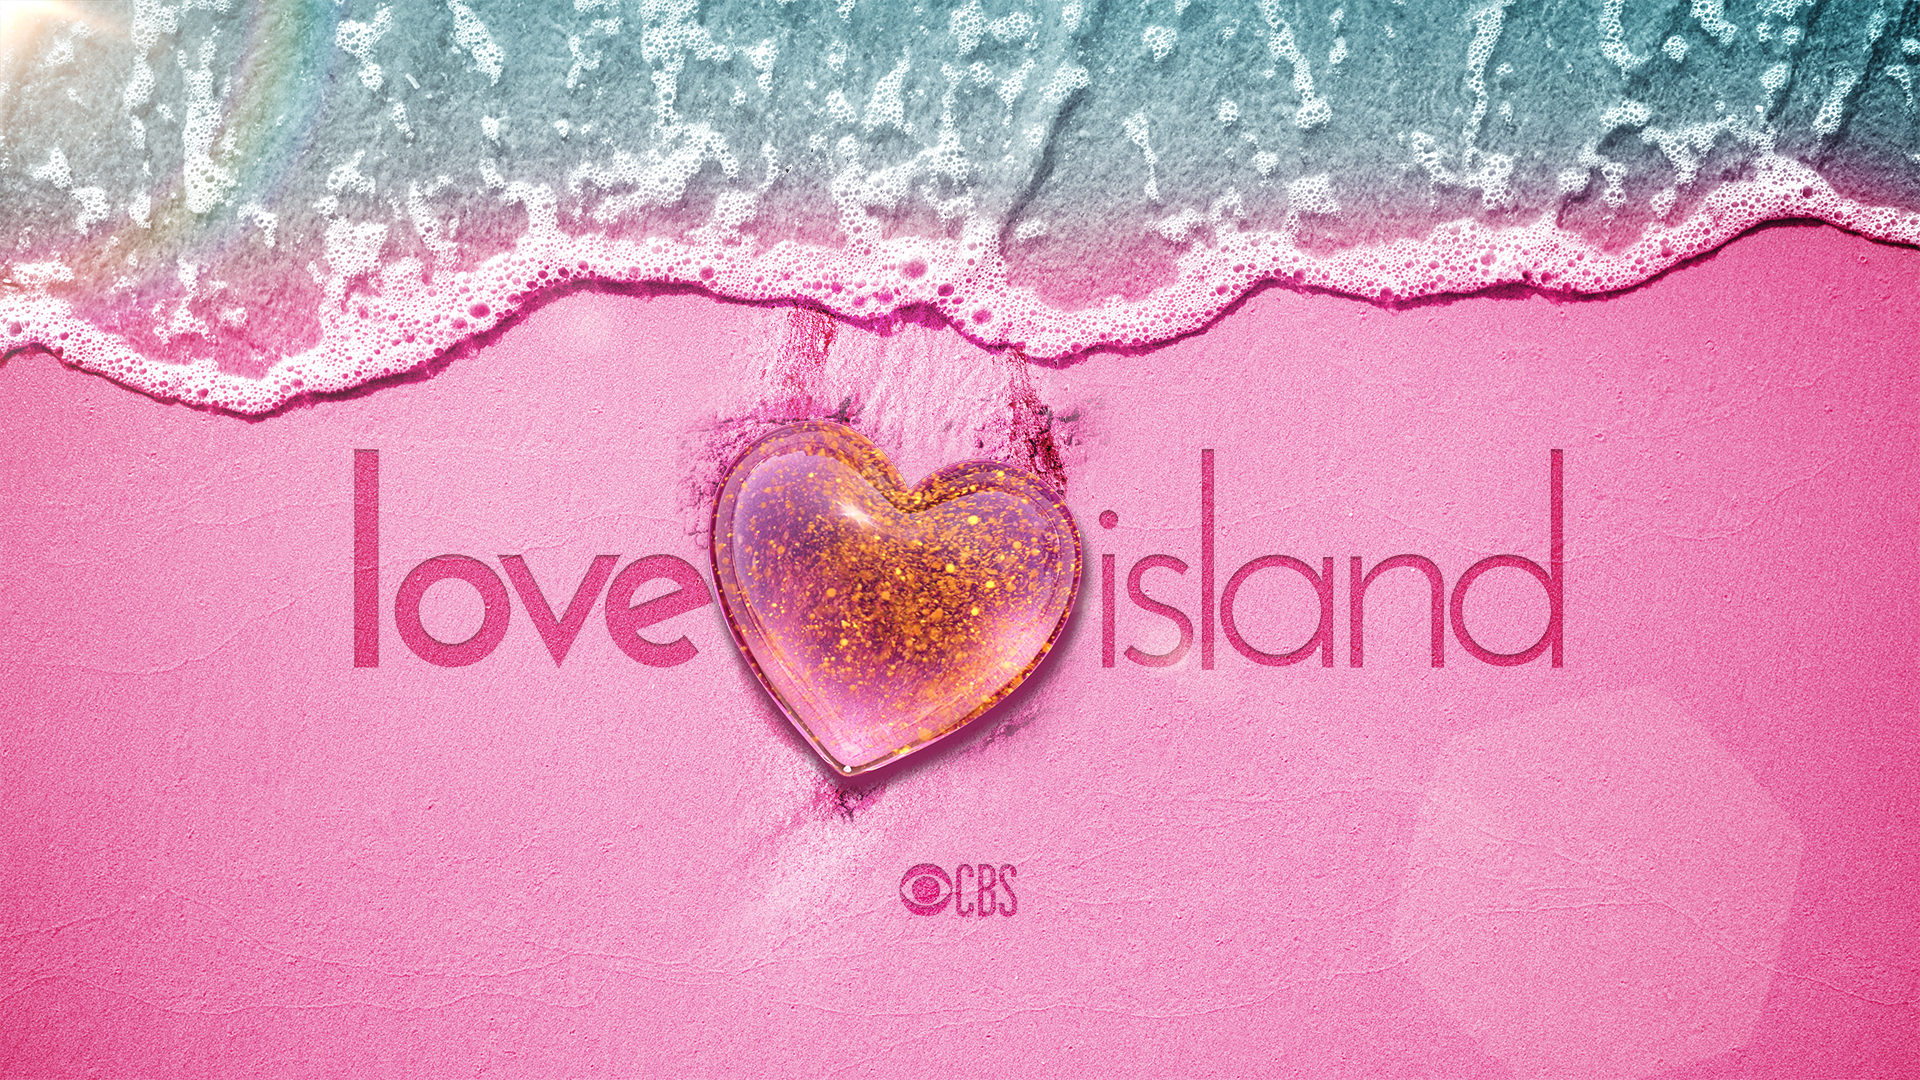 American viewers got their own 'LOVE ISLAND' experience this summer, to mixed results. (CBS Broadcasting, Inc.)